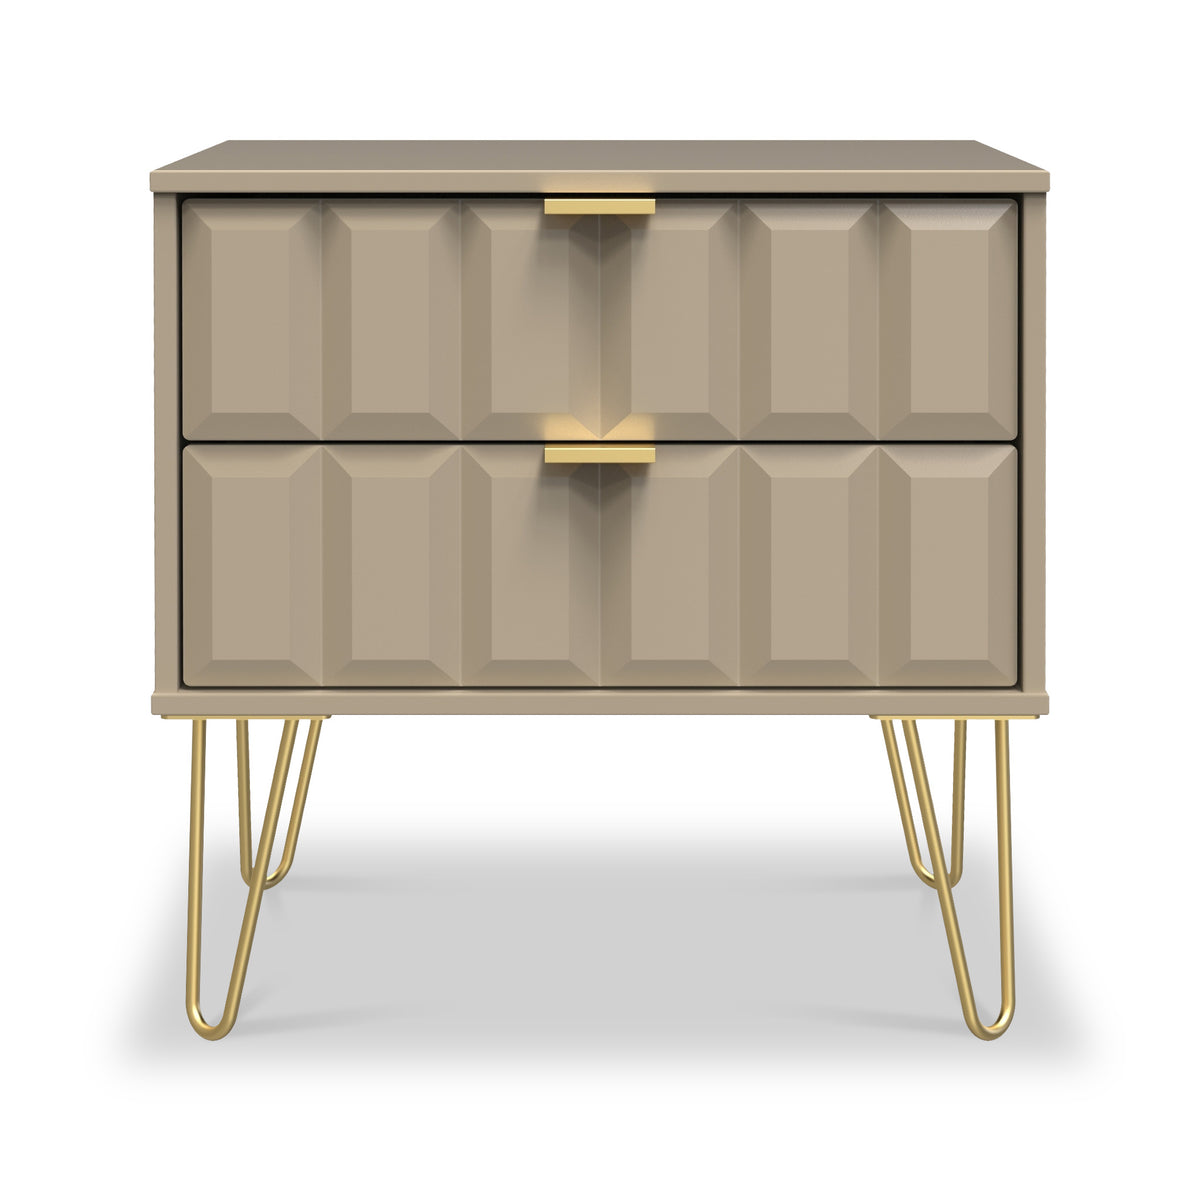 Harlow Taupe 2 Drawer Utility Chest with Gold Hairpin Legs